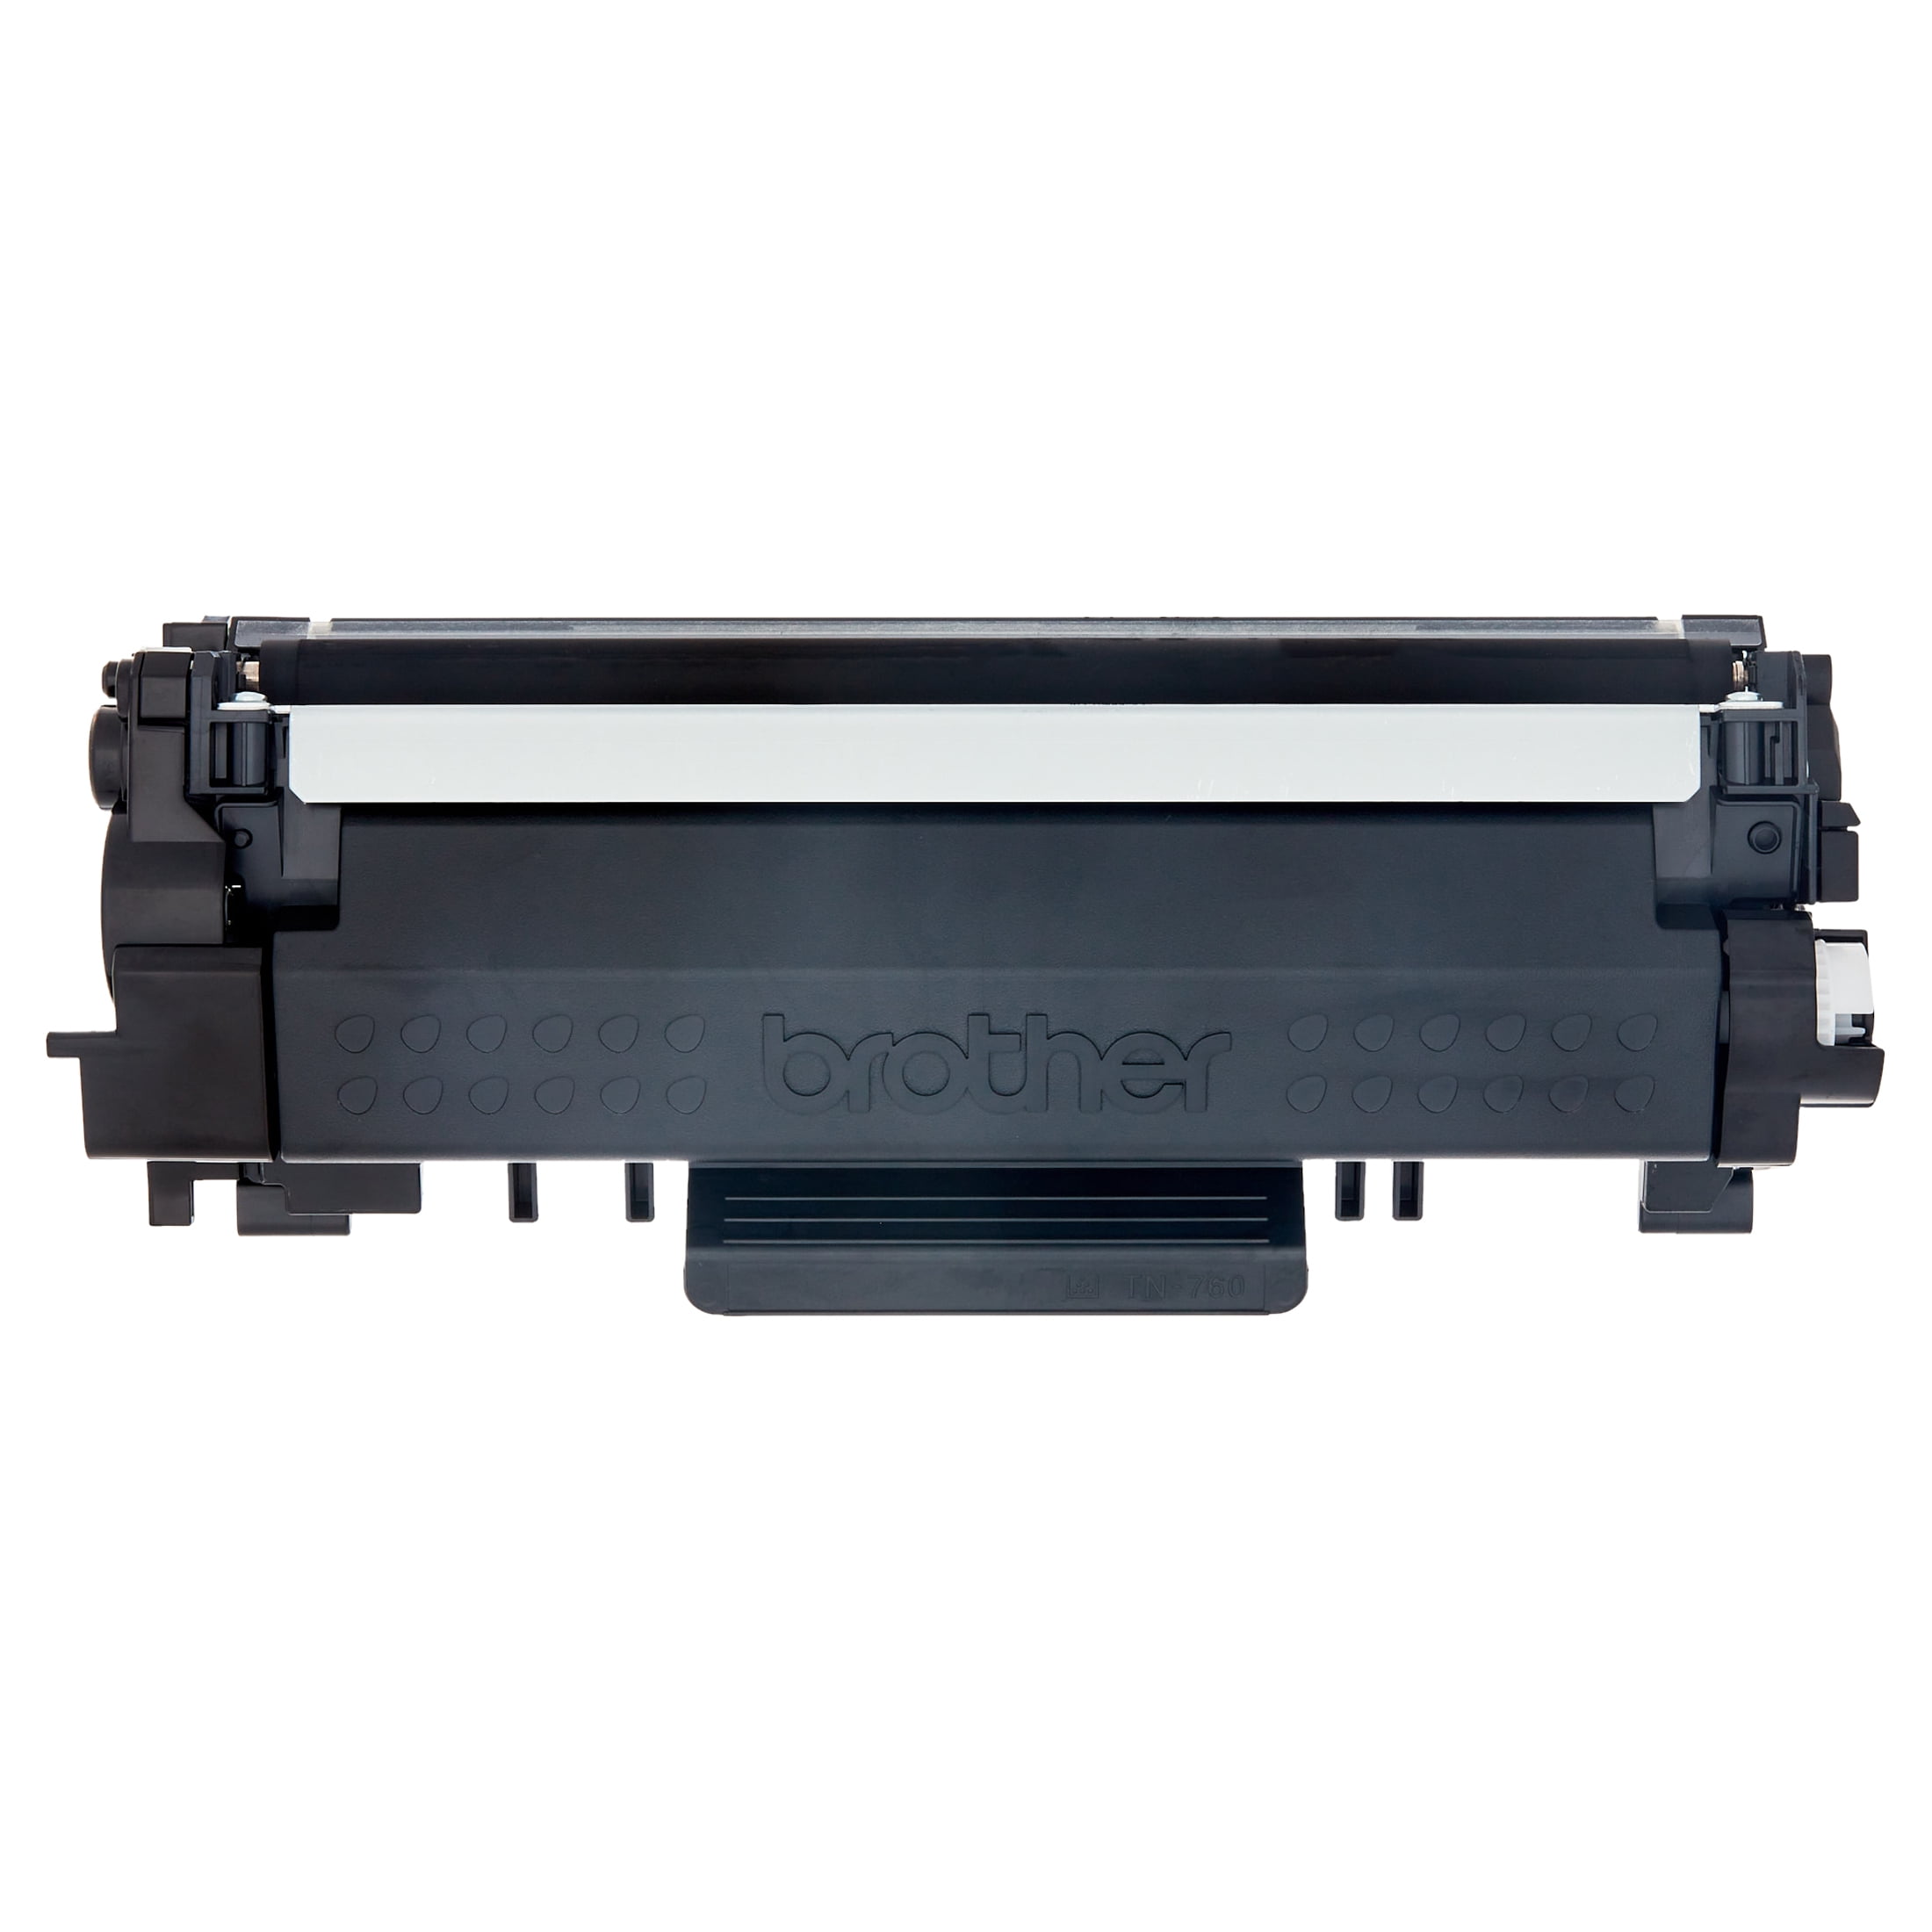 Compatible Toner G&G / Brother TN-241 Black ~ 2.500 Pages